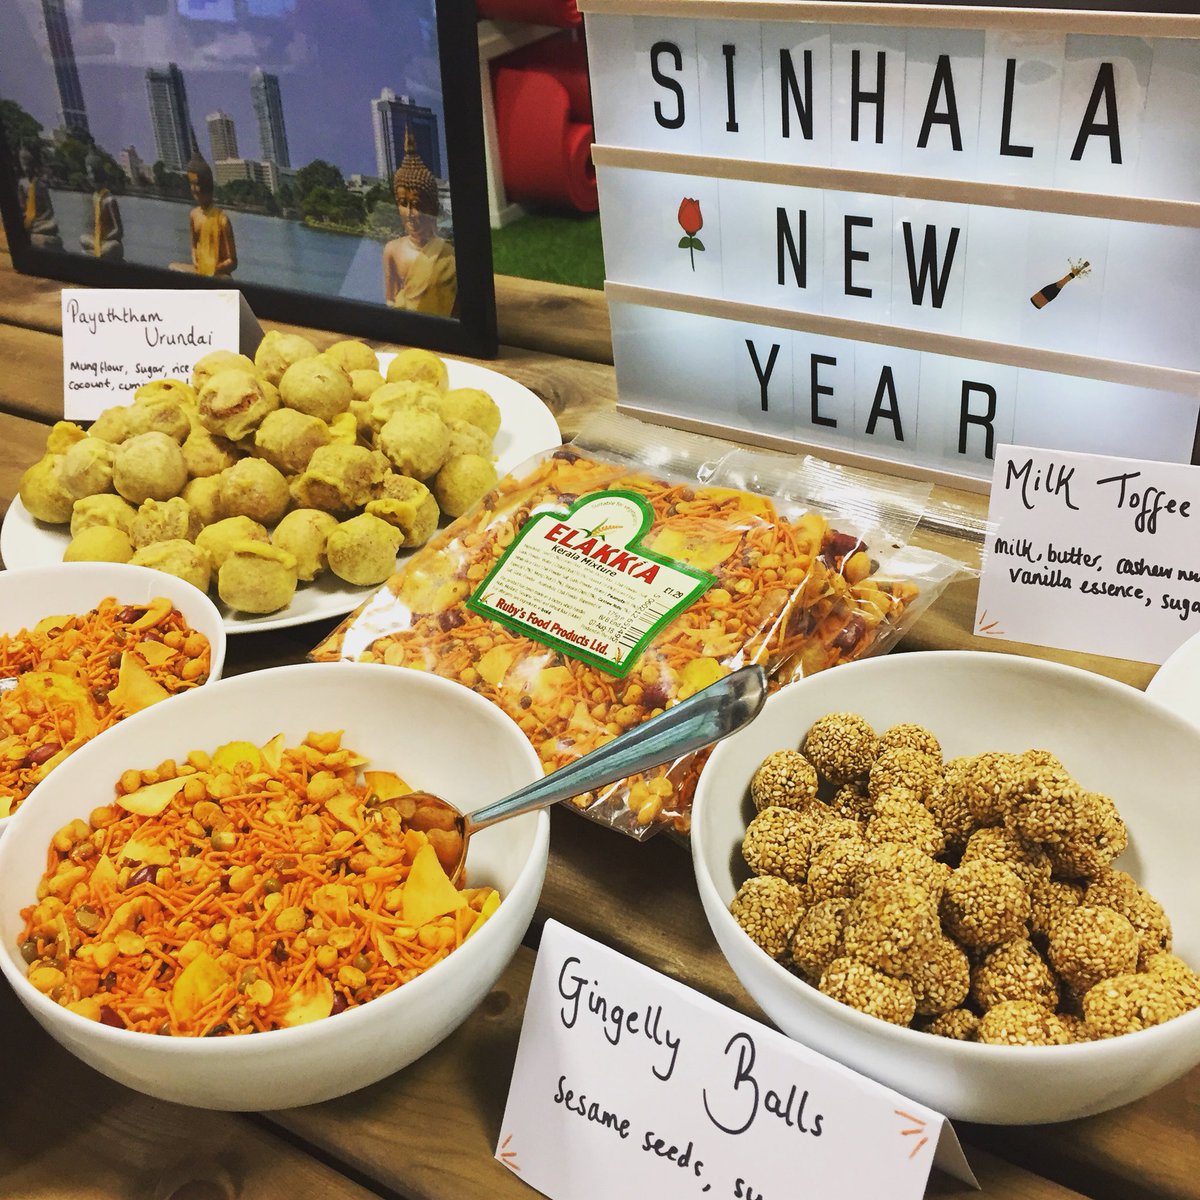 We’re joining our friends at @_CogCom in celebrating Sinhala and Tamil New Year with some tasty Sri Lankan treats. Suba Aluth Awuruddak Wewa! 🎉